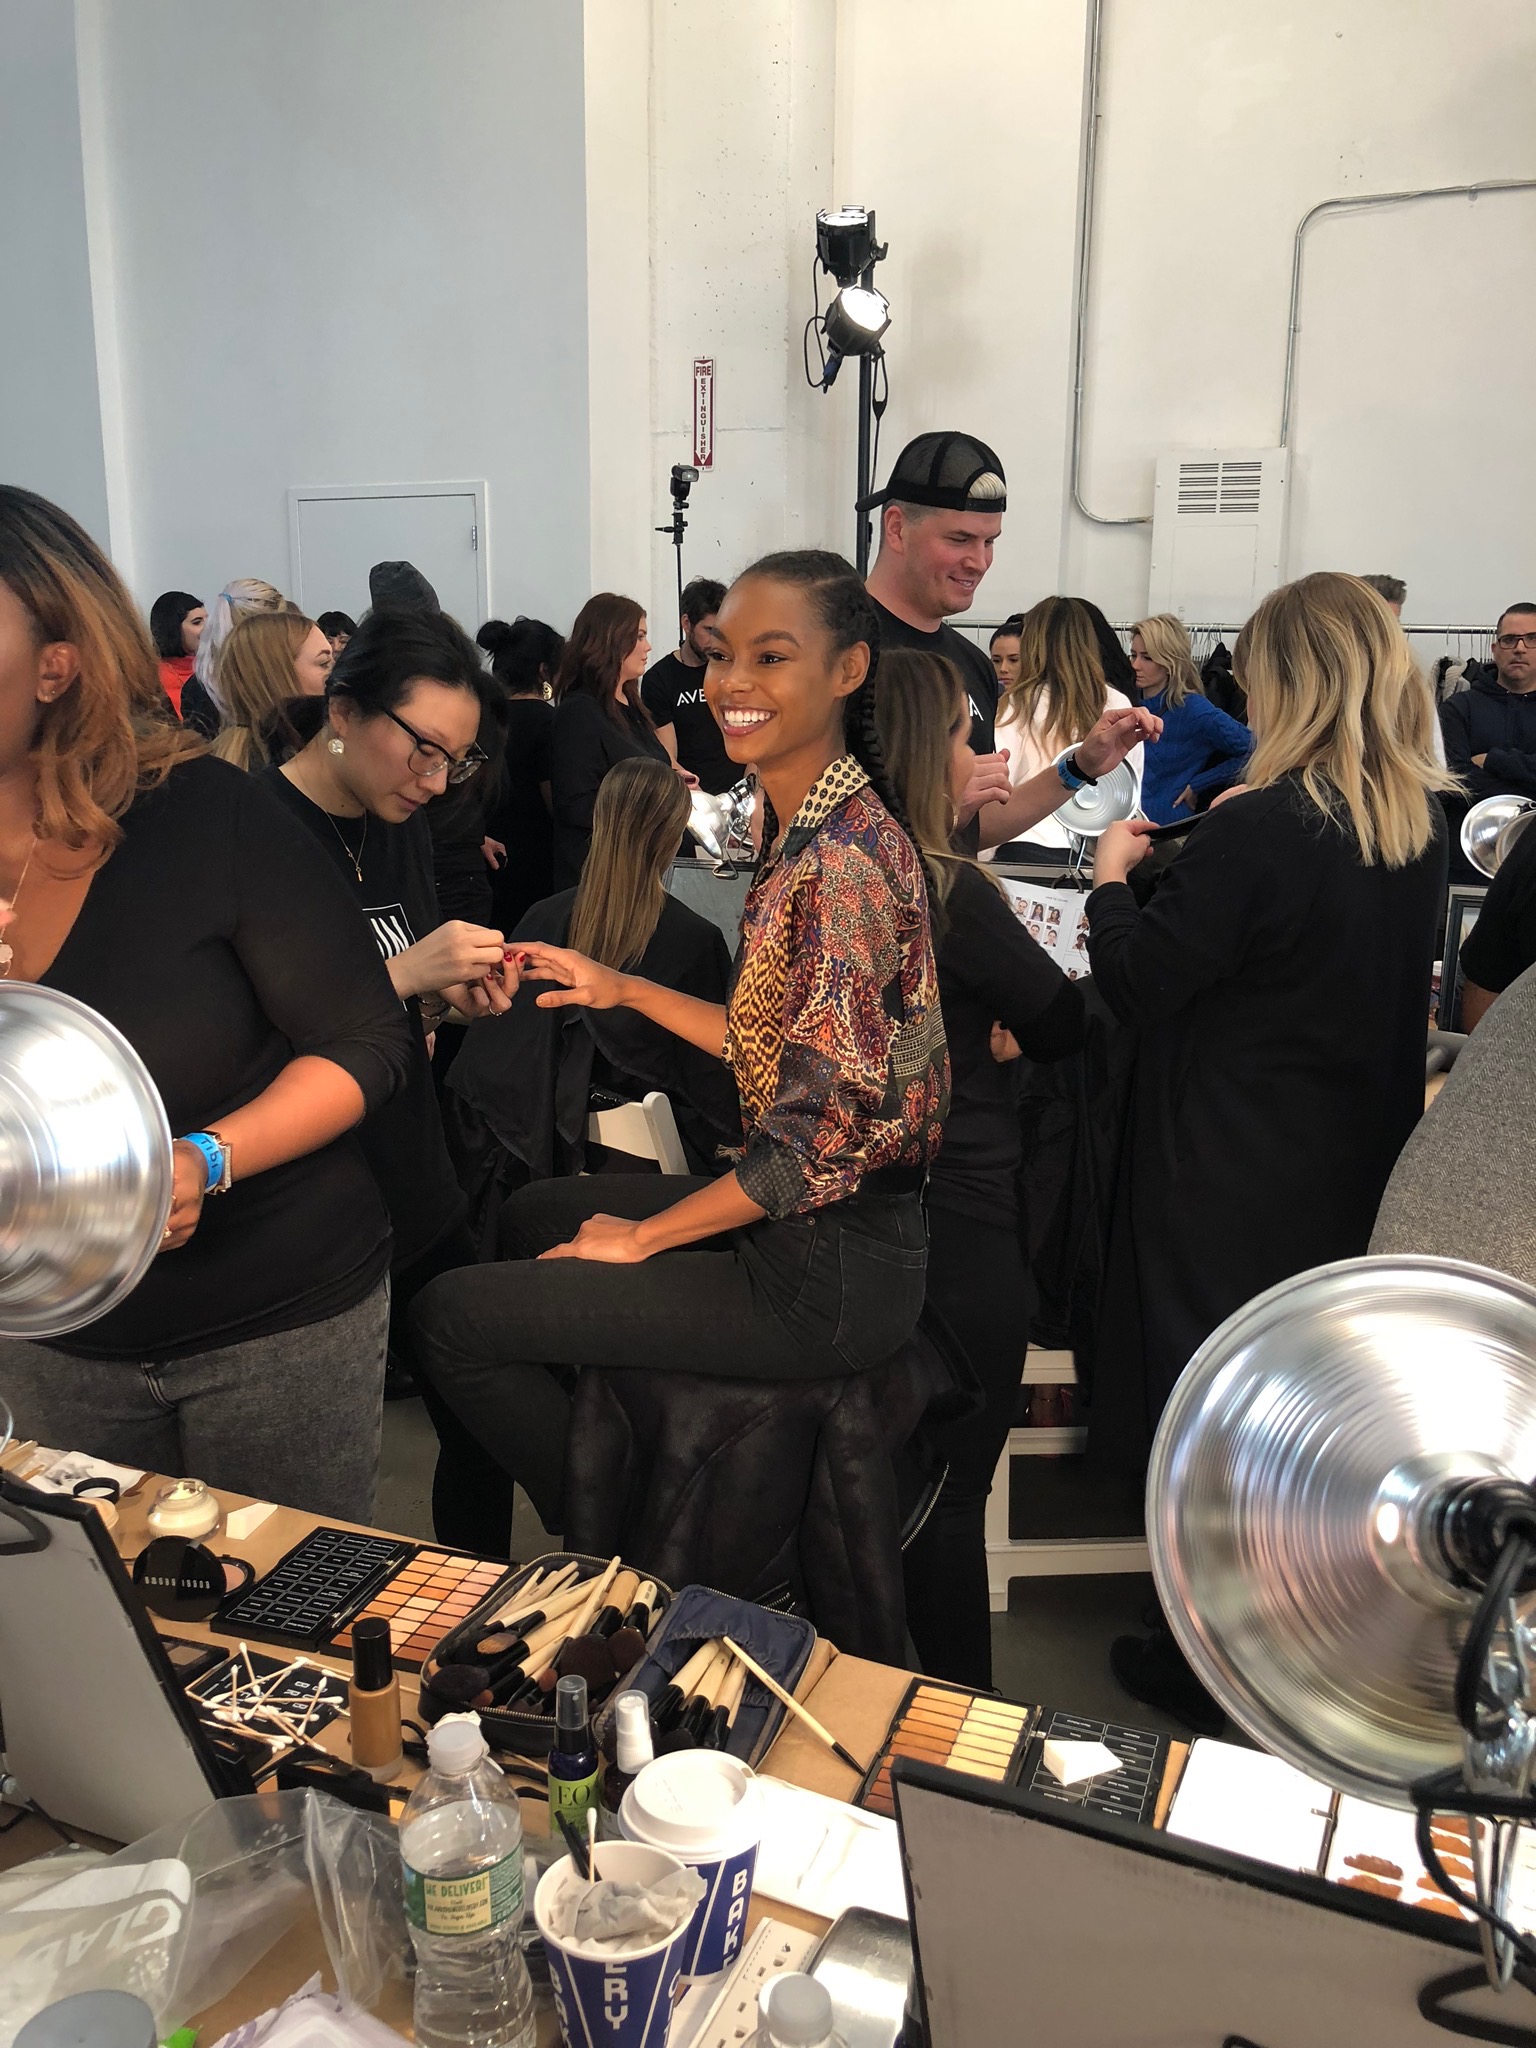 Backstage at a fashion show: a black model gets her nails done, she is smiling